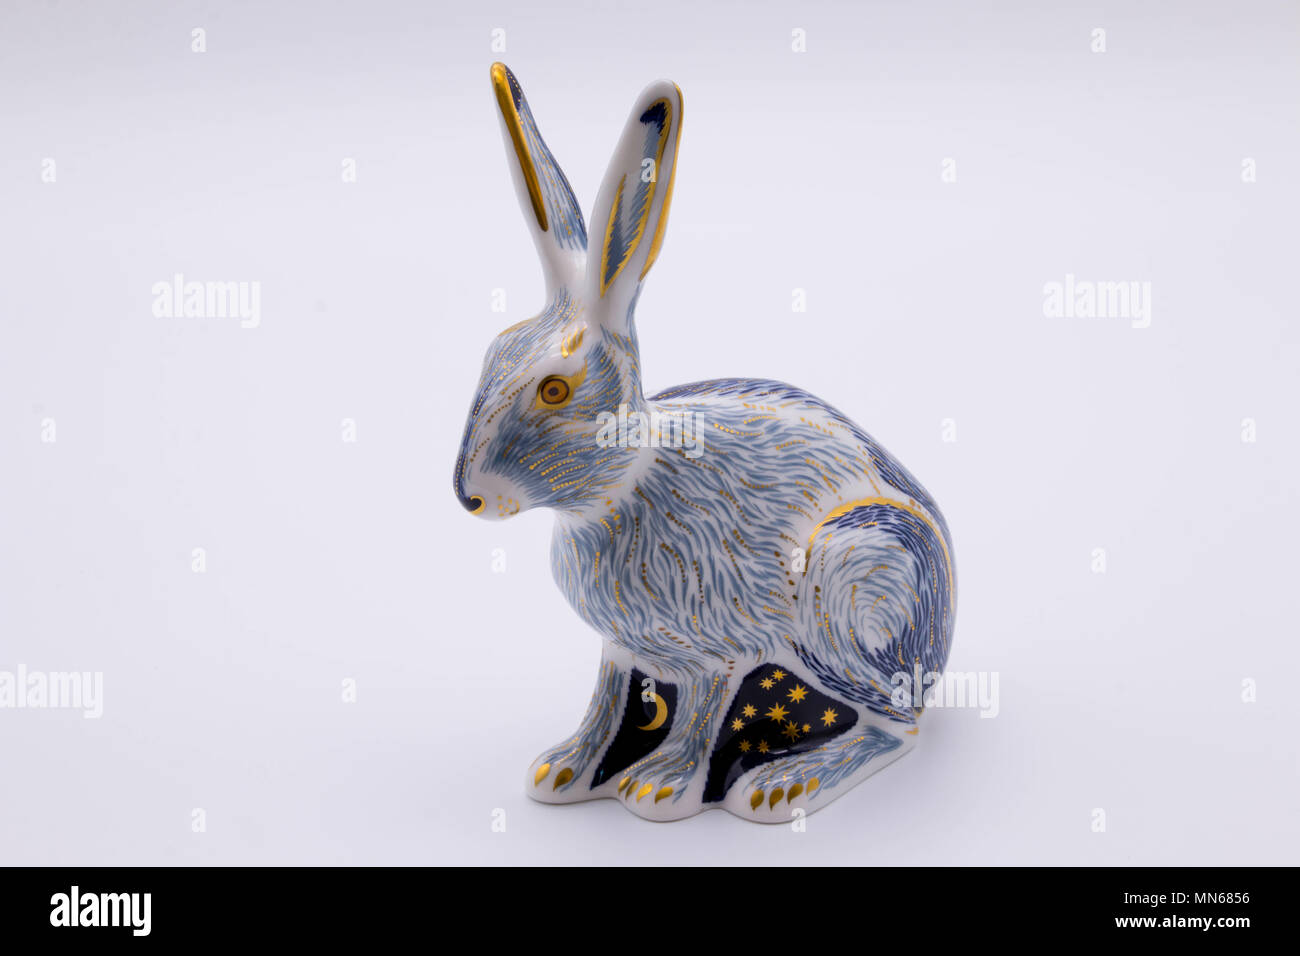 Royal Crown Derby bone china paperweight of a hare uk Stock Photo